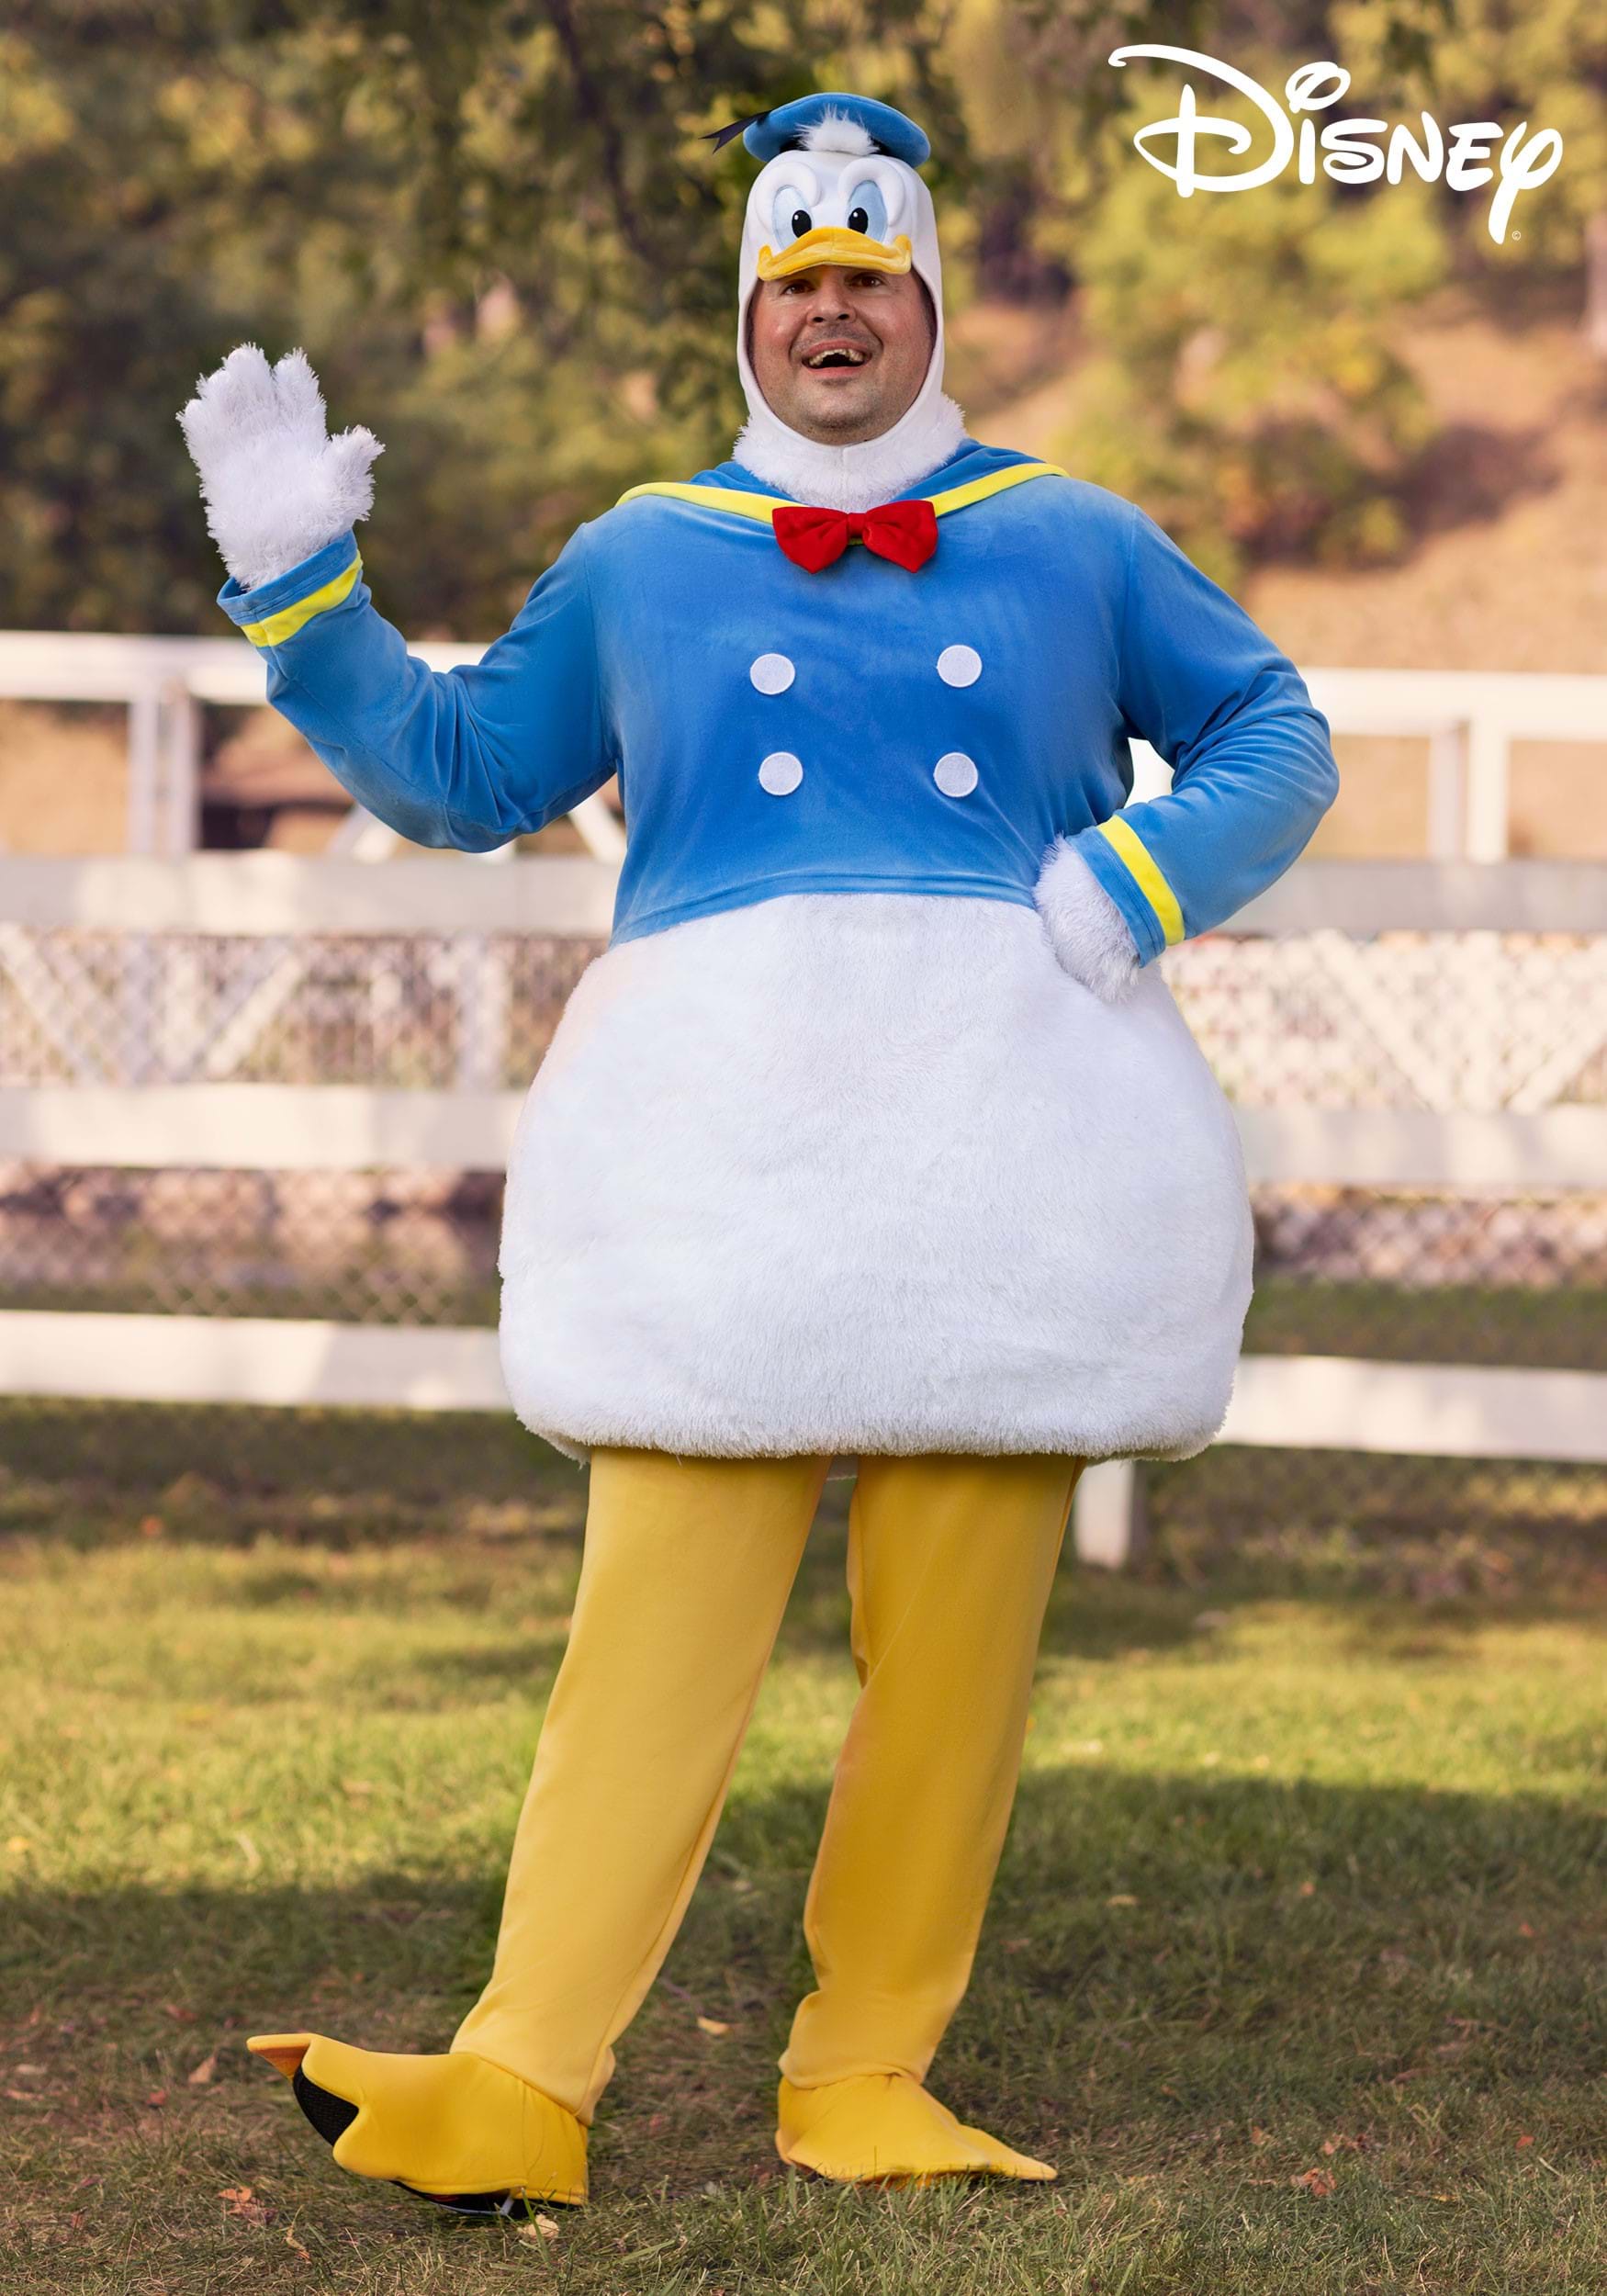 https://images.fun.com/products/76166/1-1/donald-duck-plus-size-costume.jpg